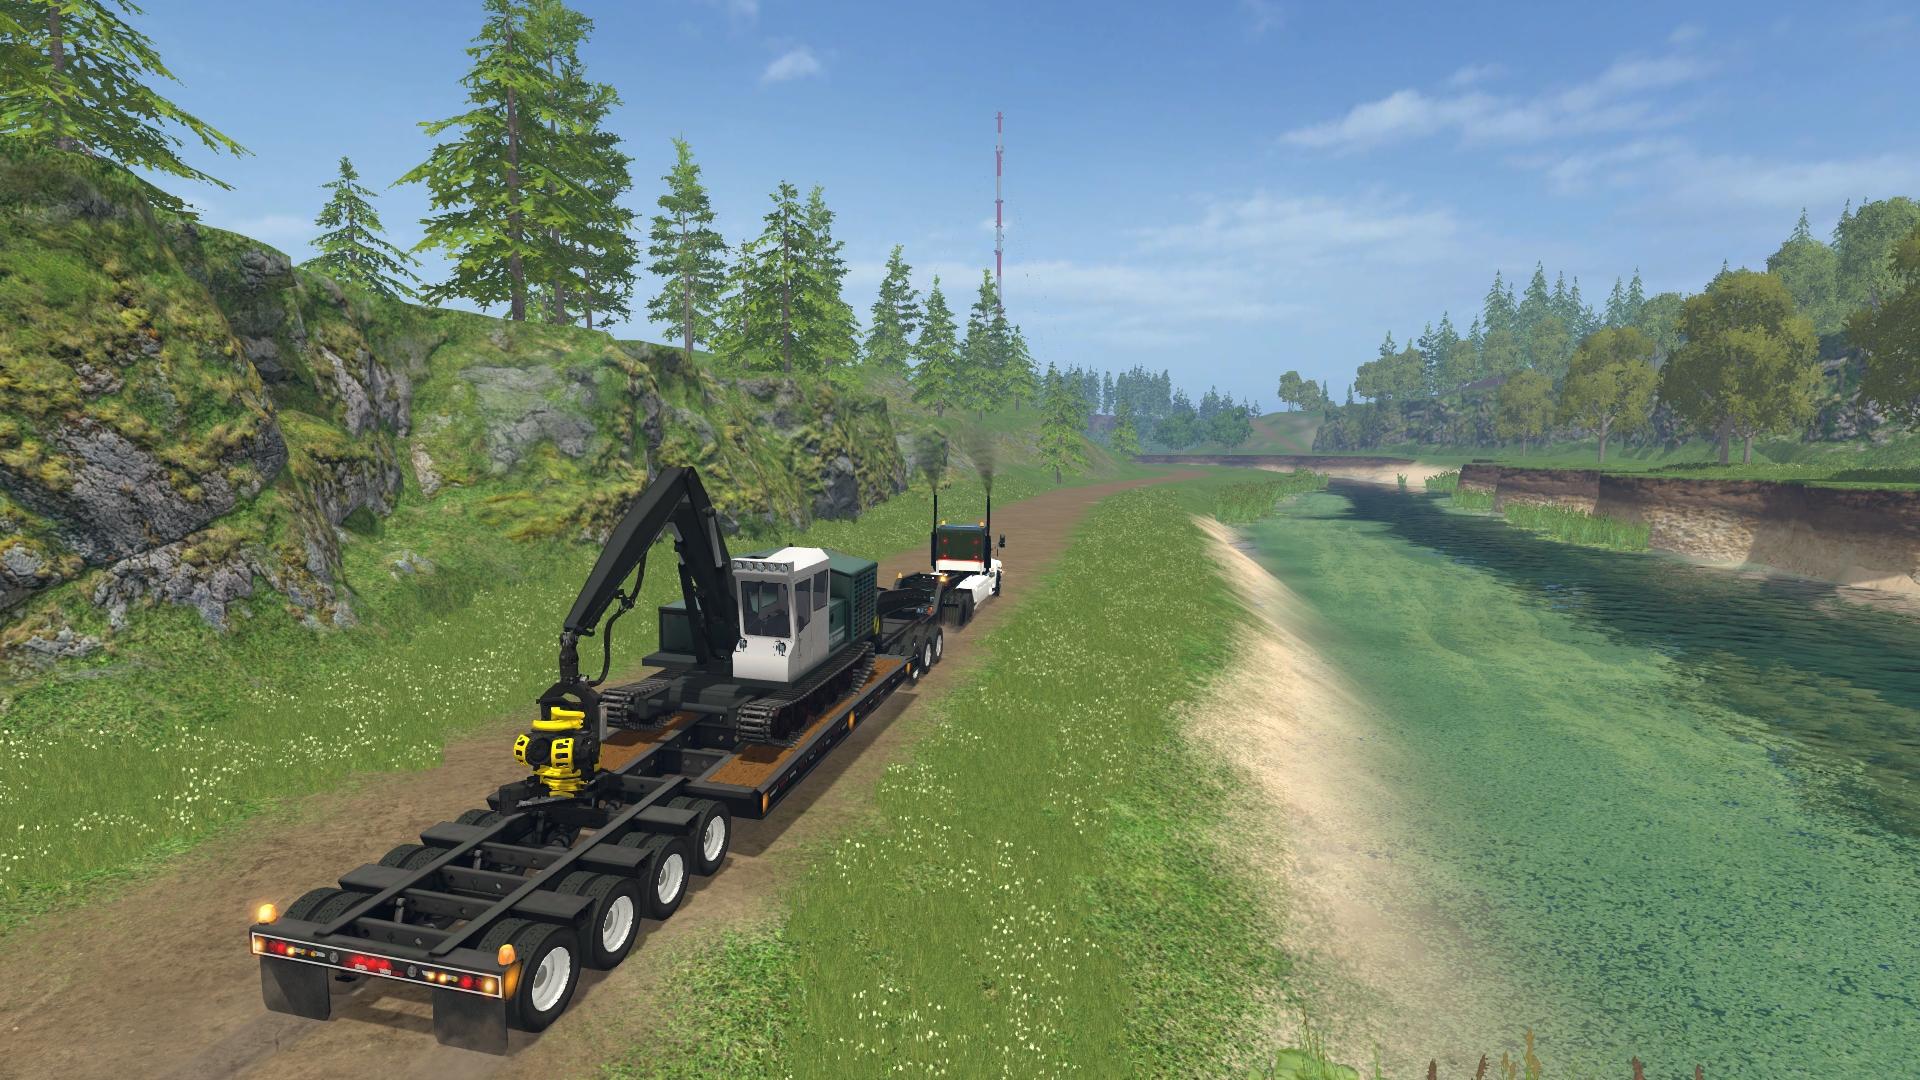 Gallery of Fs19 Lowboy With Straps.